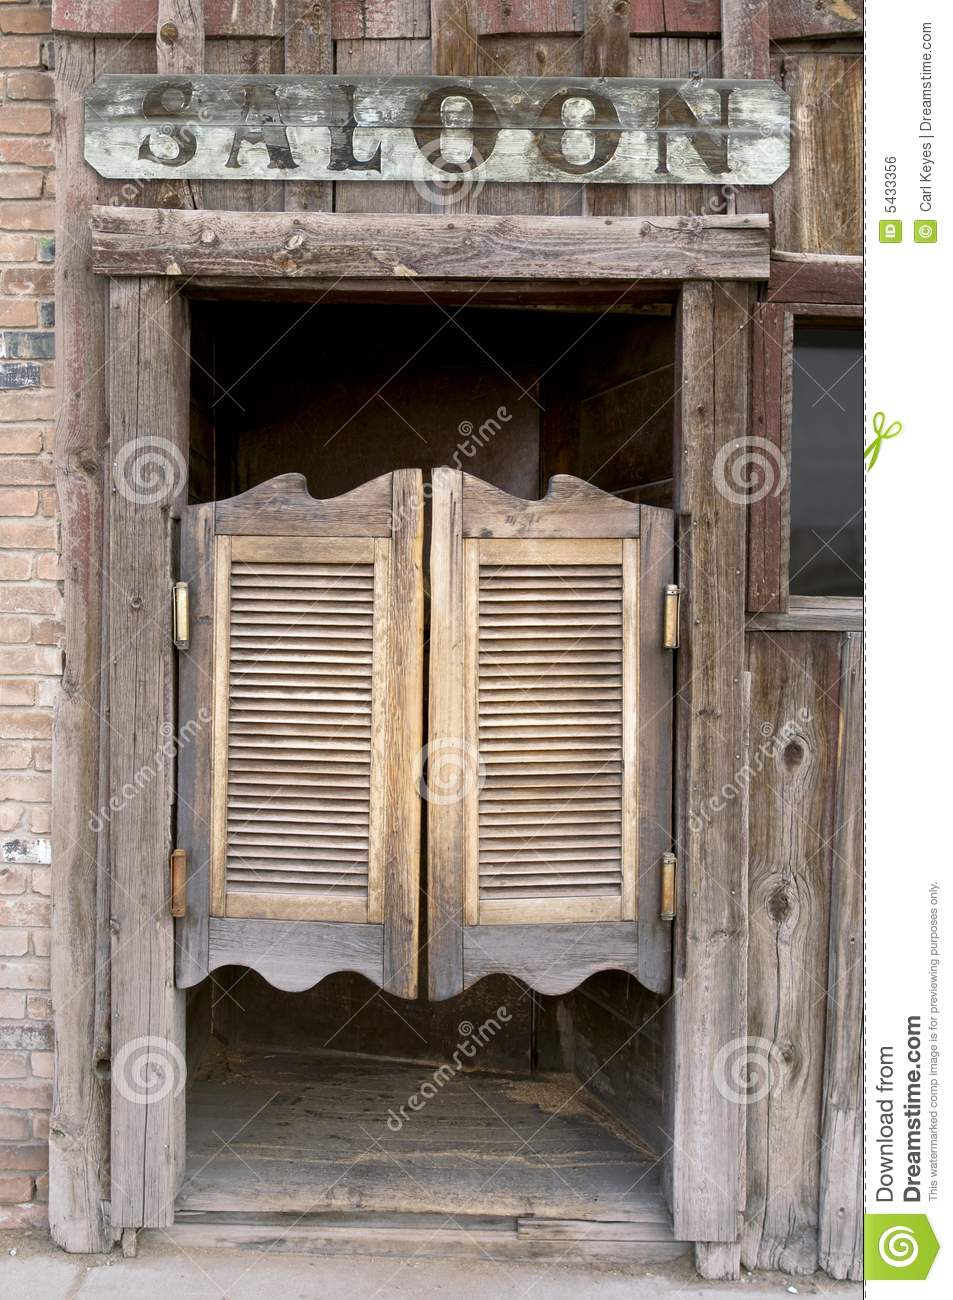 Old Western Swinging Saloon Doors With A Saloon Sign Above Doors